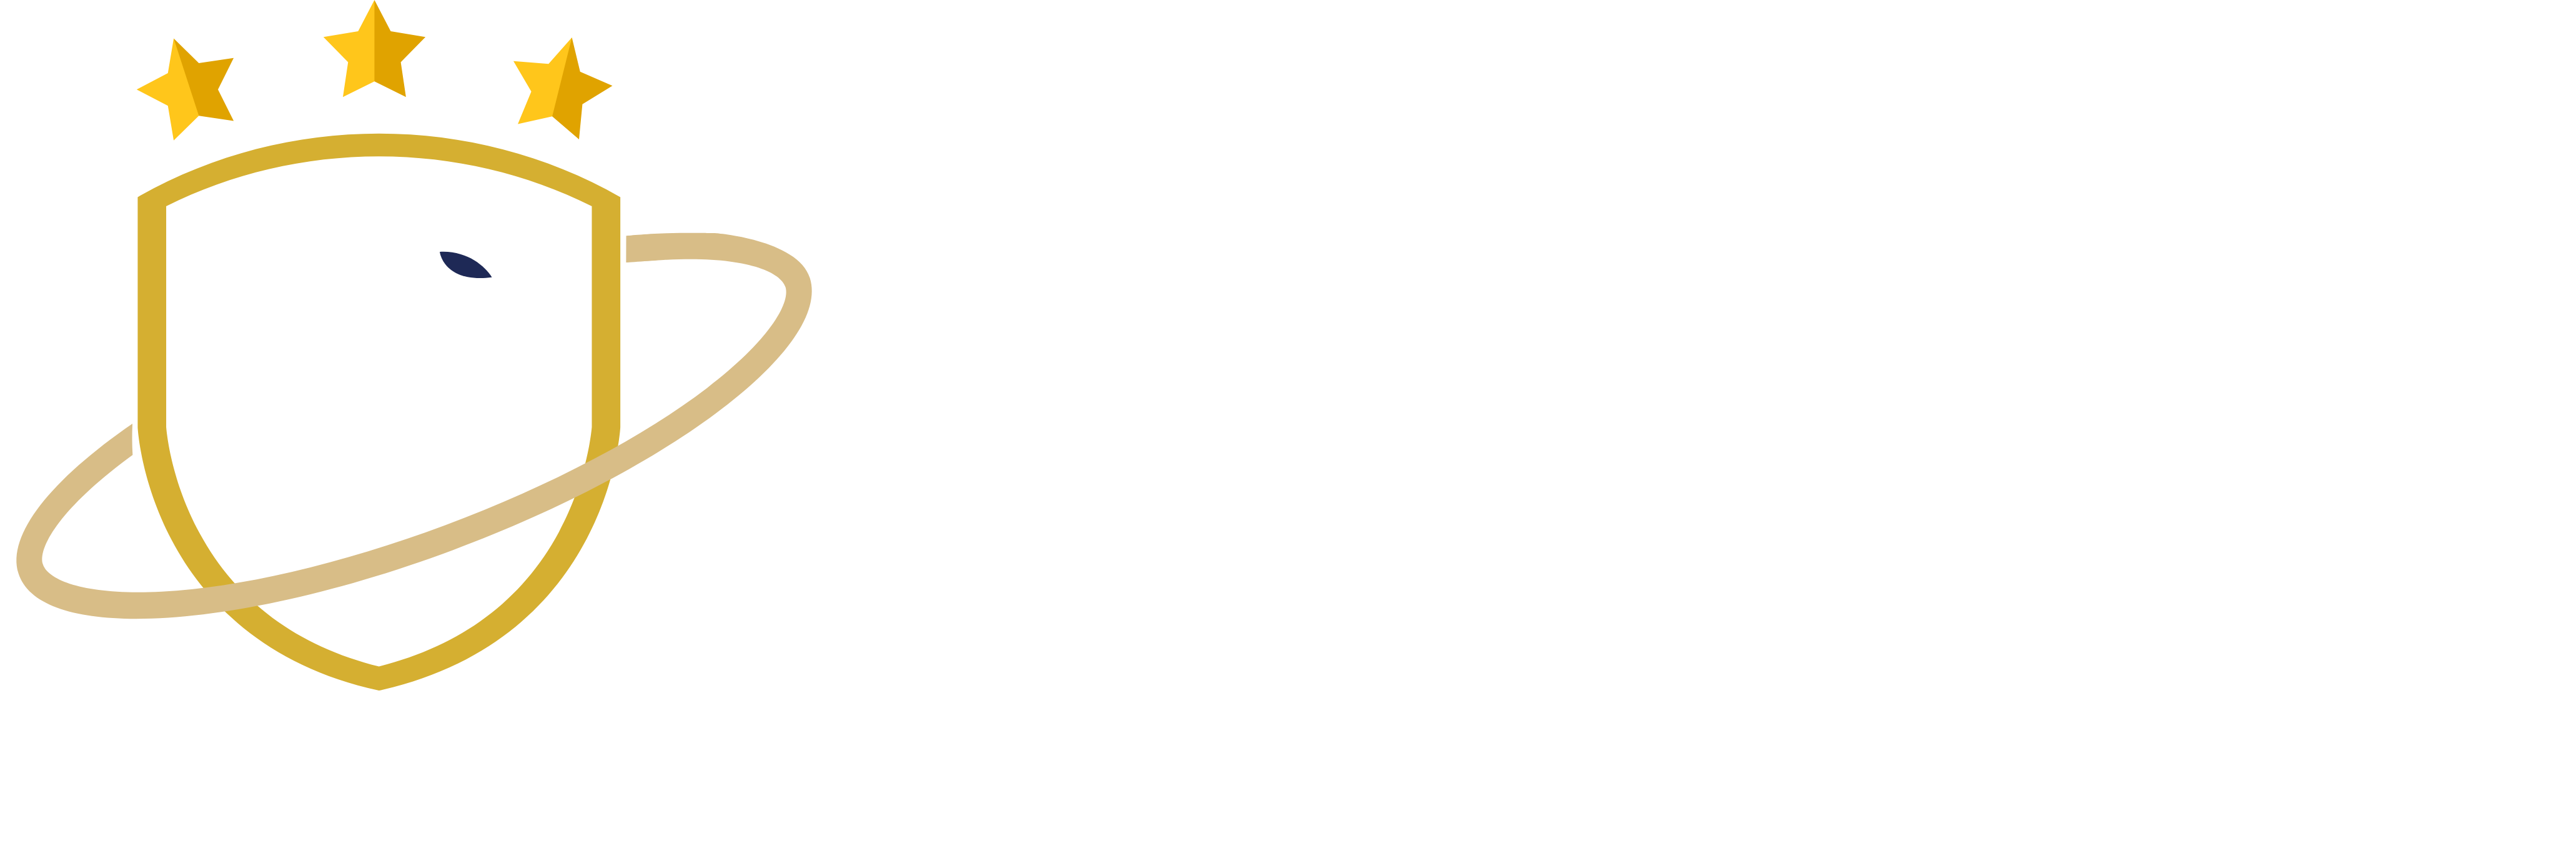 Review Oracle Logo